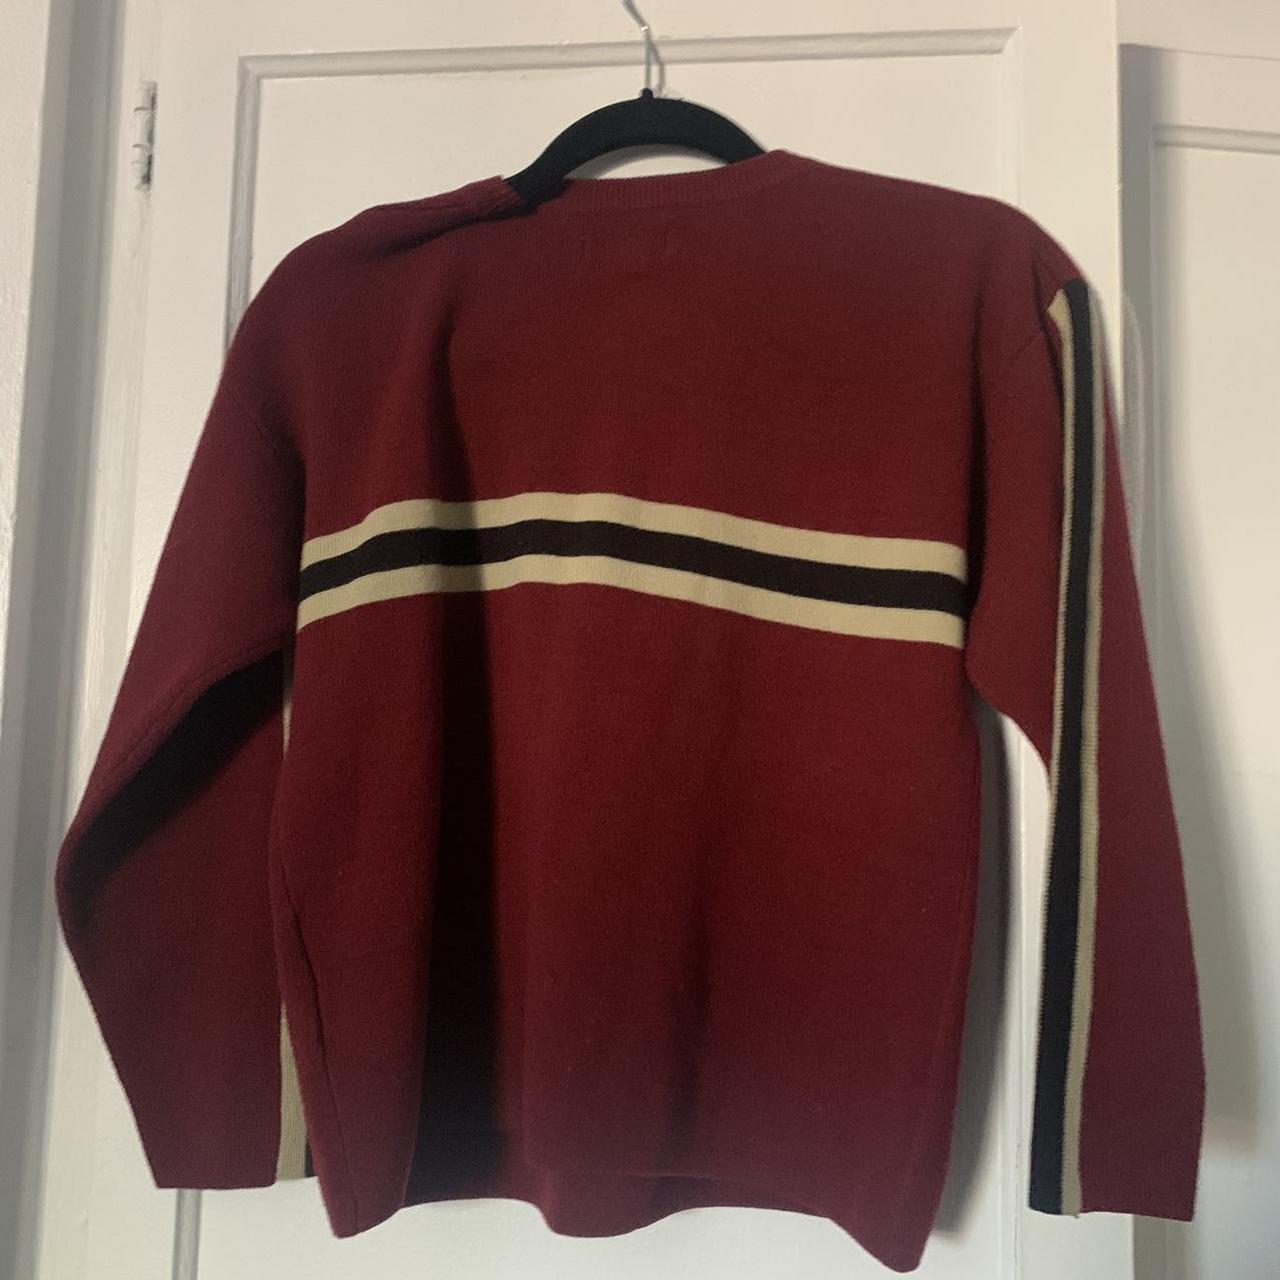 Union Bay Women's Red and Burgundy Jumper | Depop